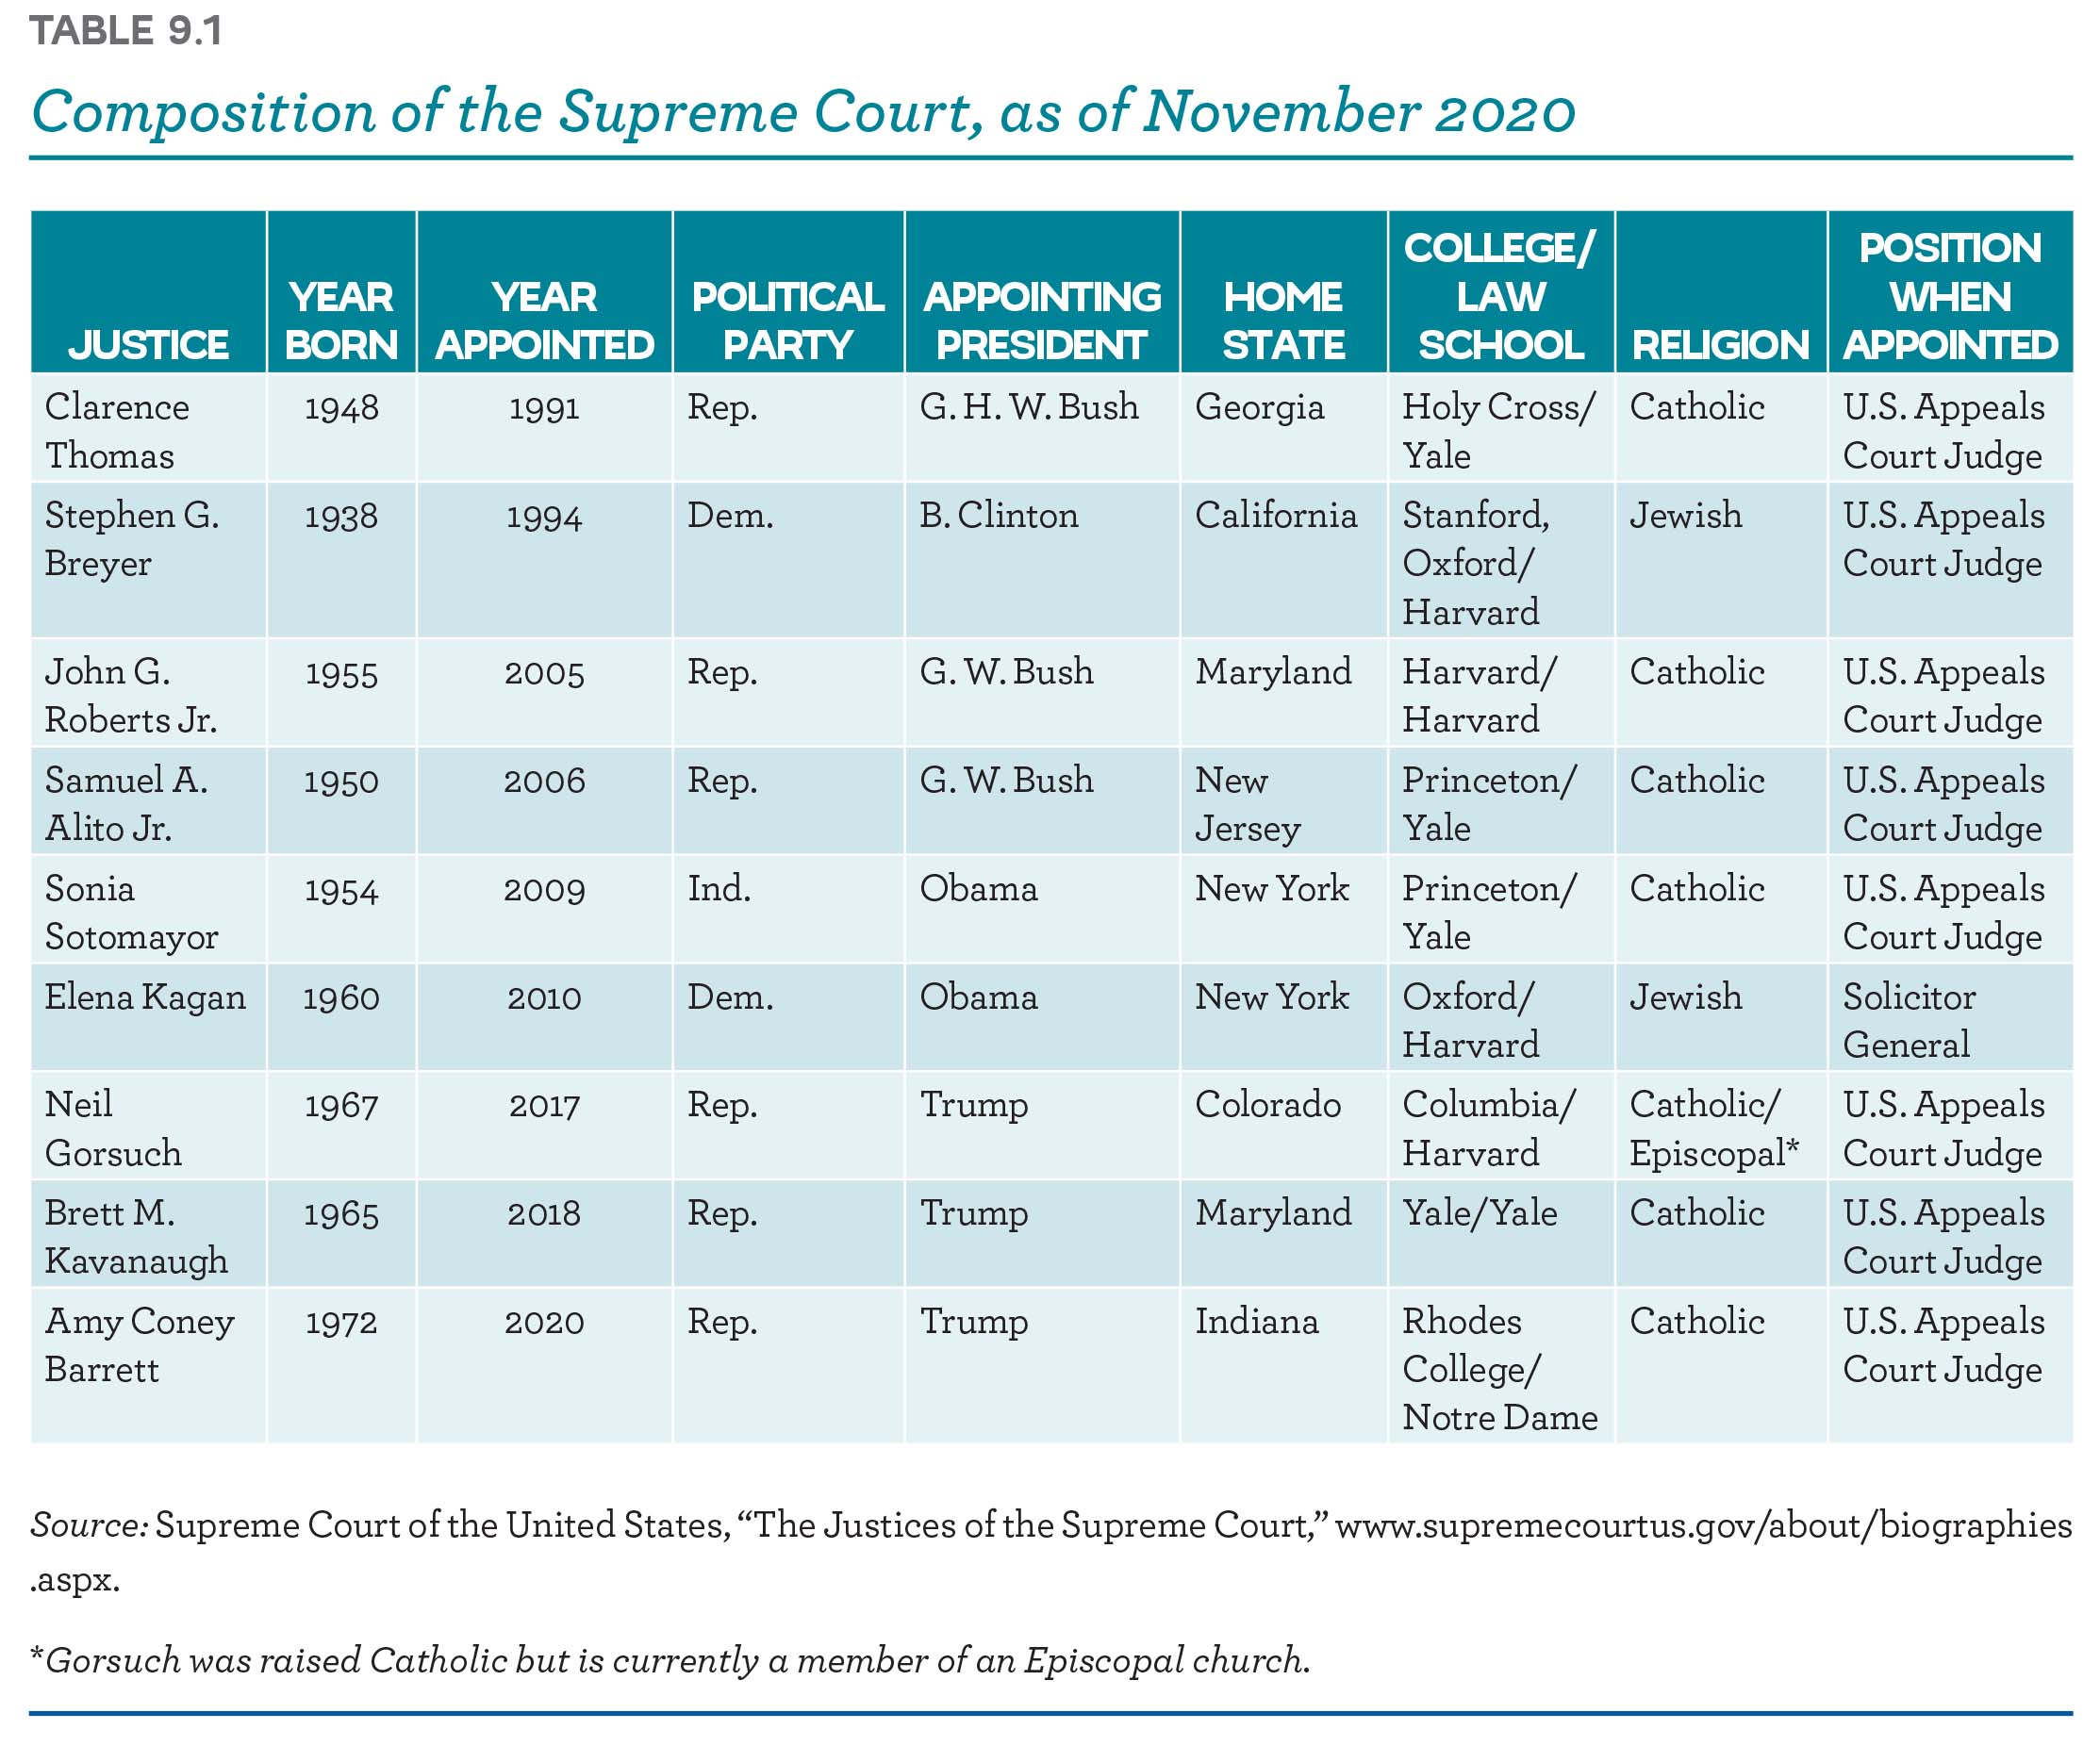 Composition of the supreme court, as of November 2020